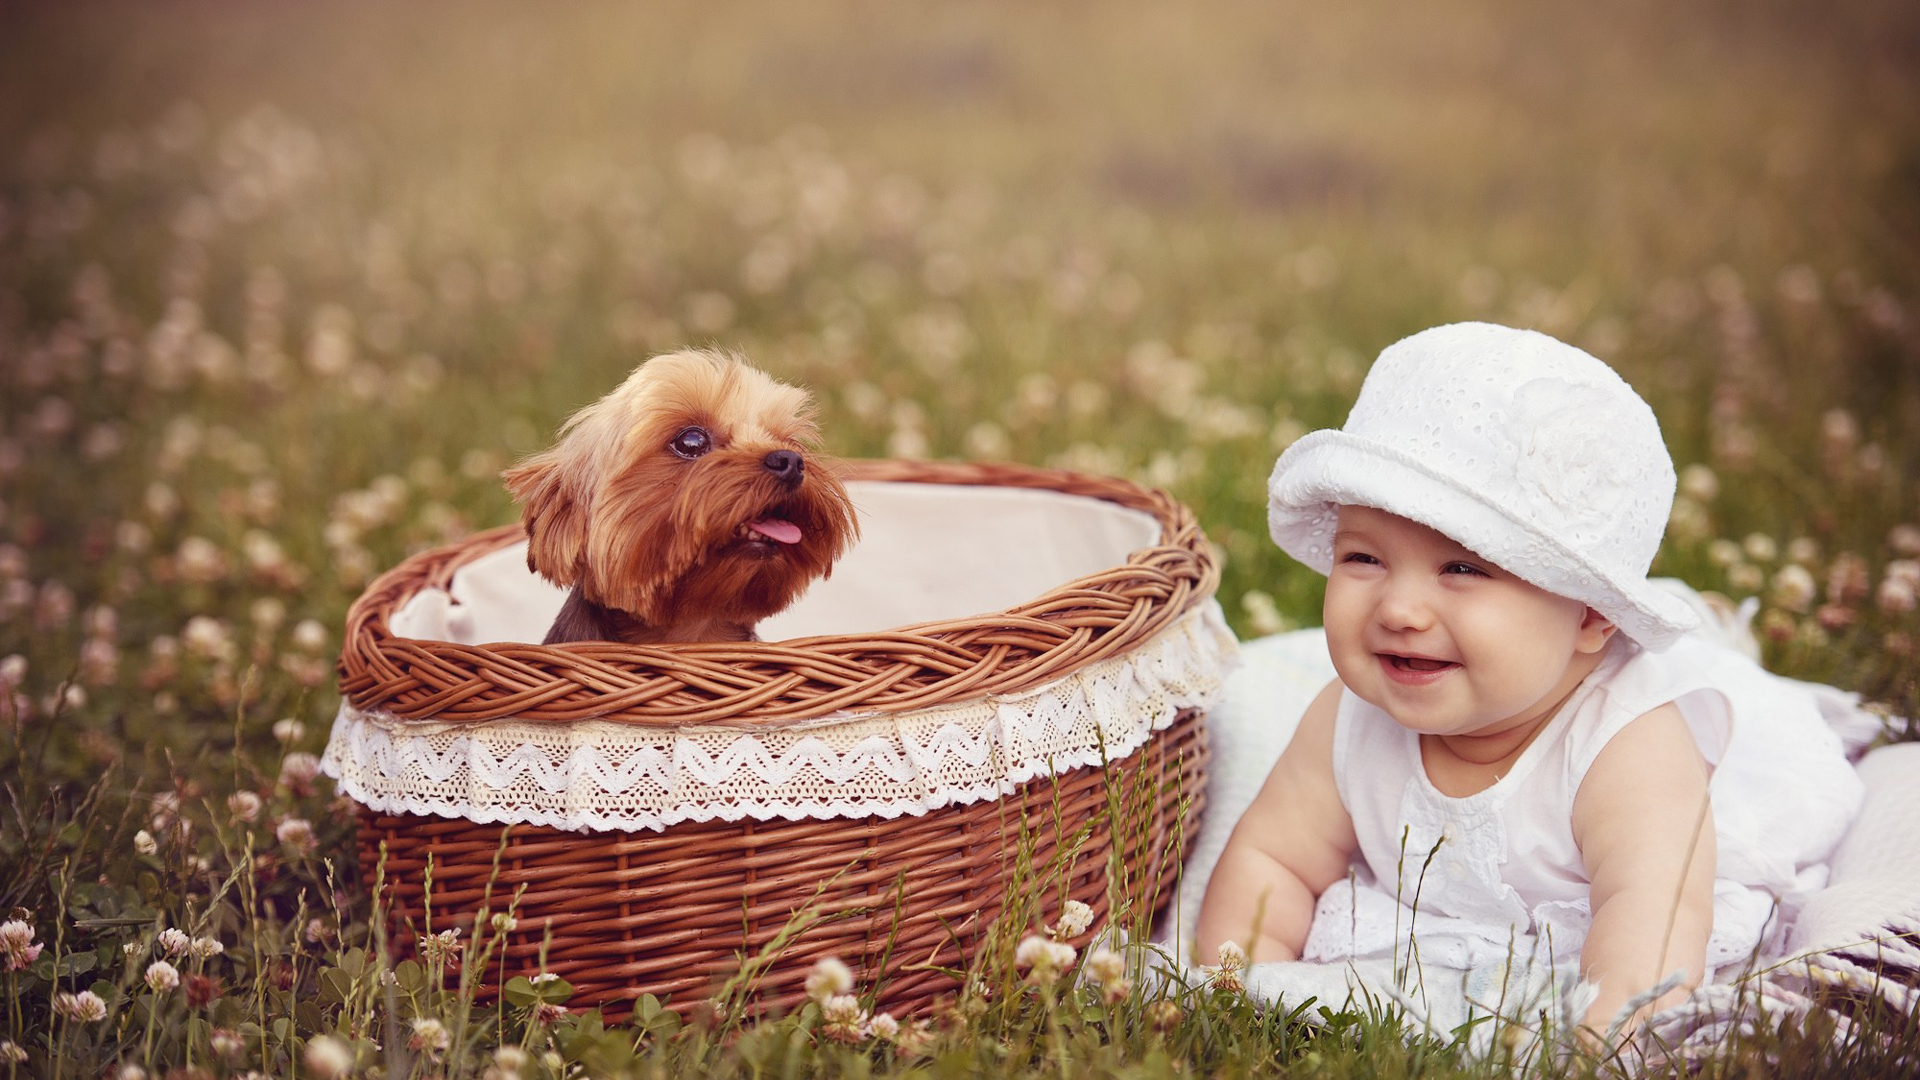 Smiley cute baby girl on green grass with flowers near brown dog inside bamboo basket wearing white dress and hat in blur Wallpaper 2K cute